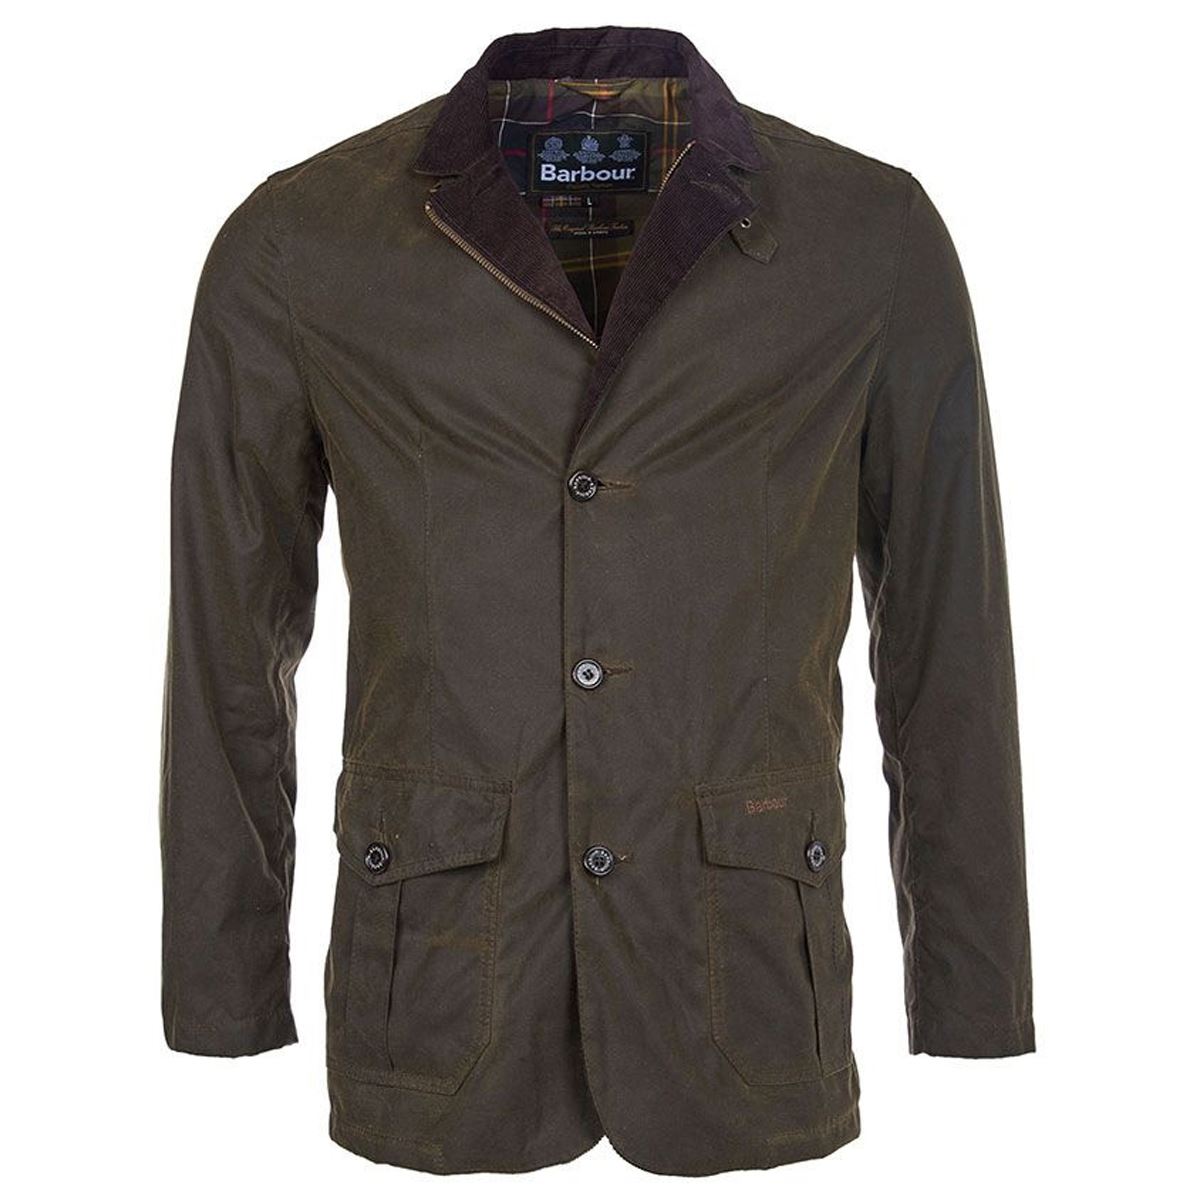 What makes the Barbour Lutz Wax Jacket comfortable and allows freedom of movement?